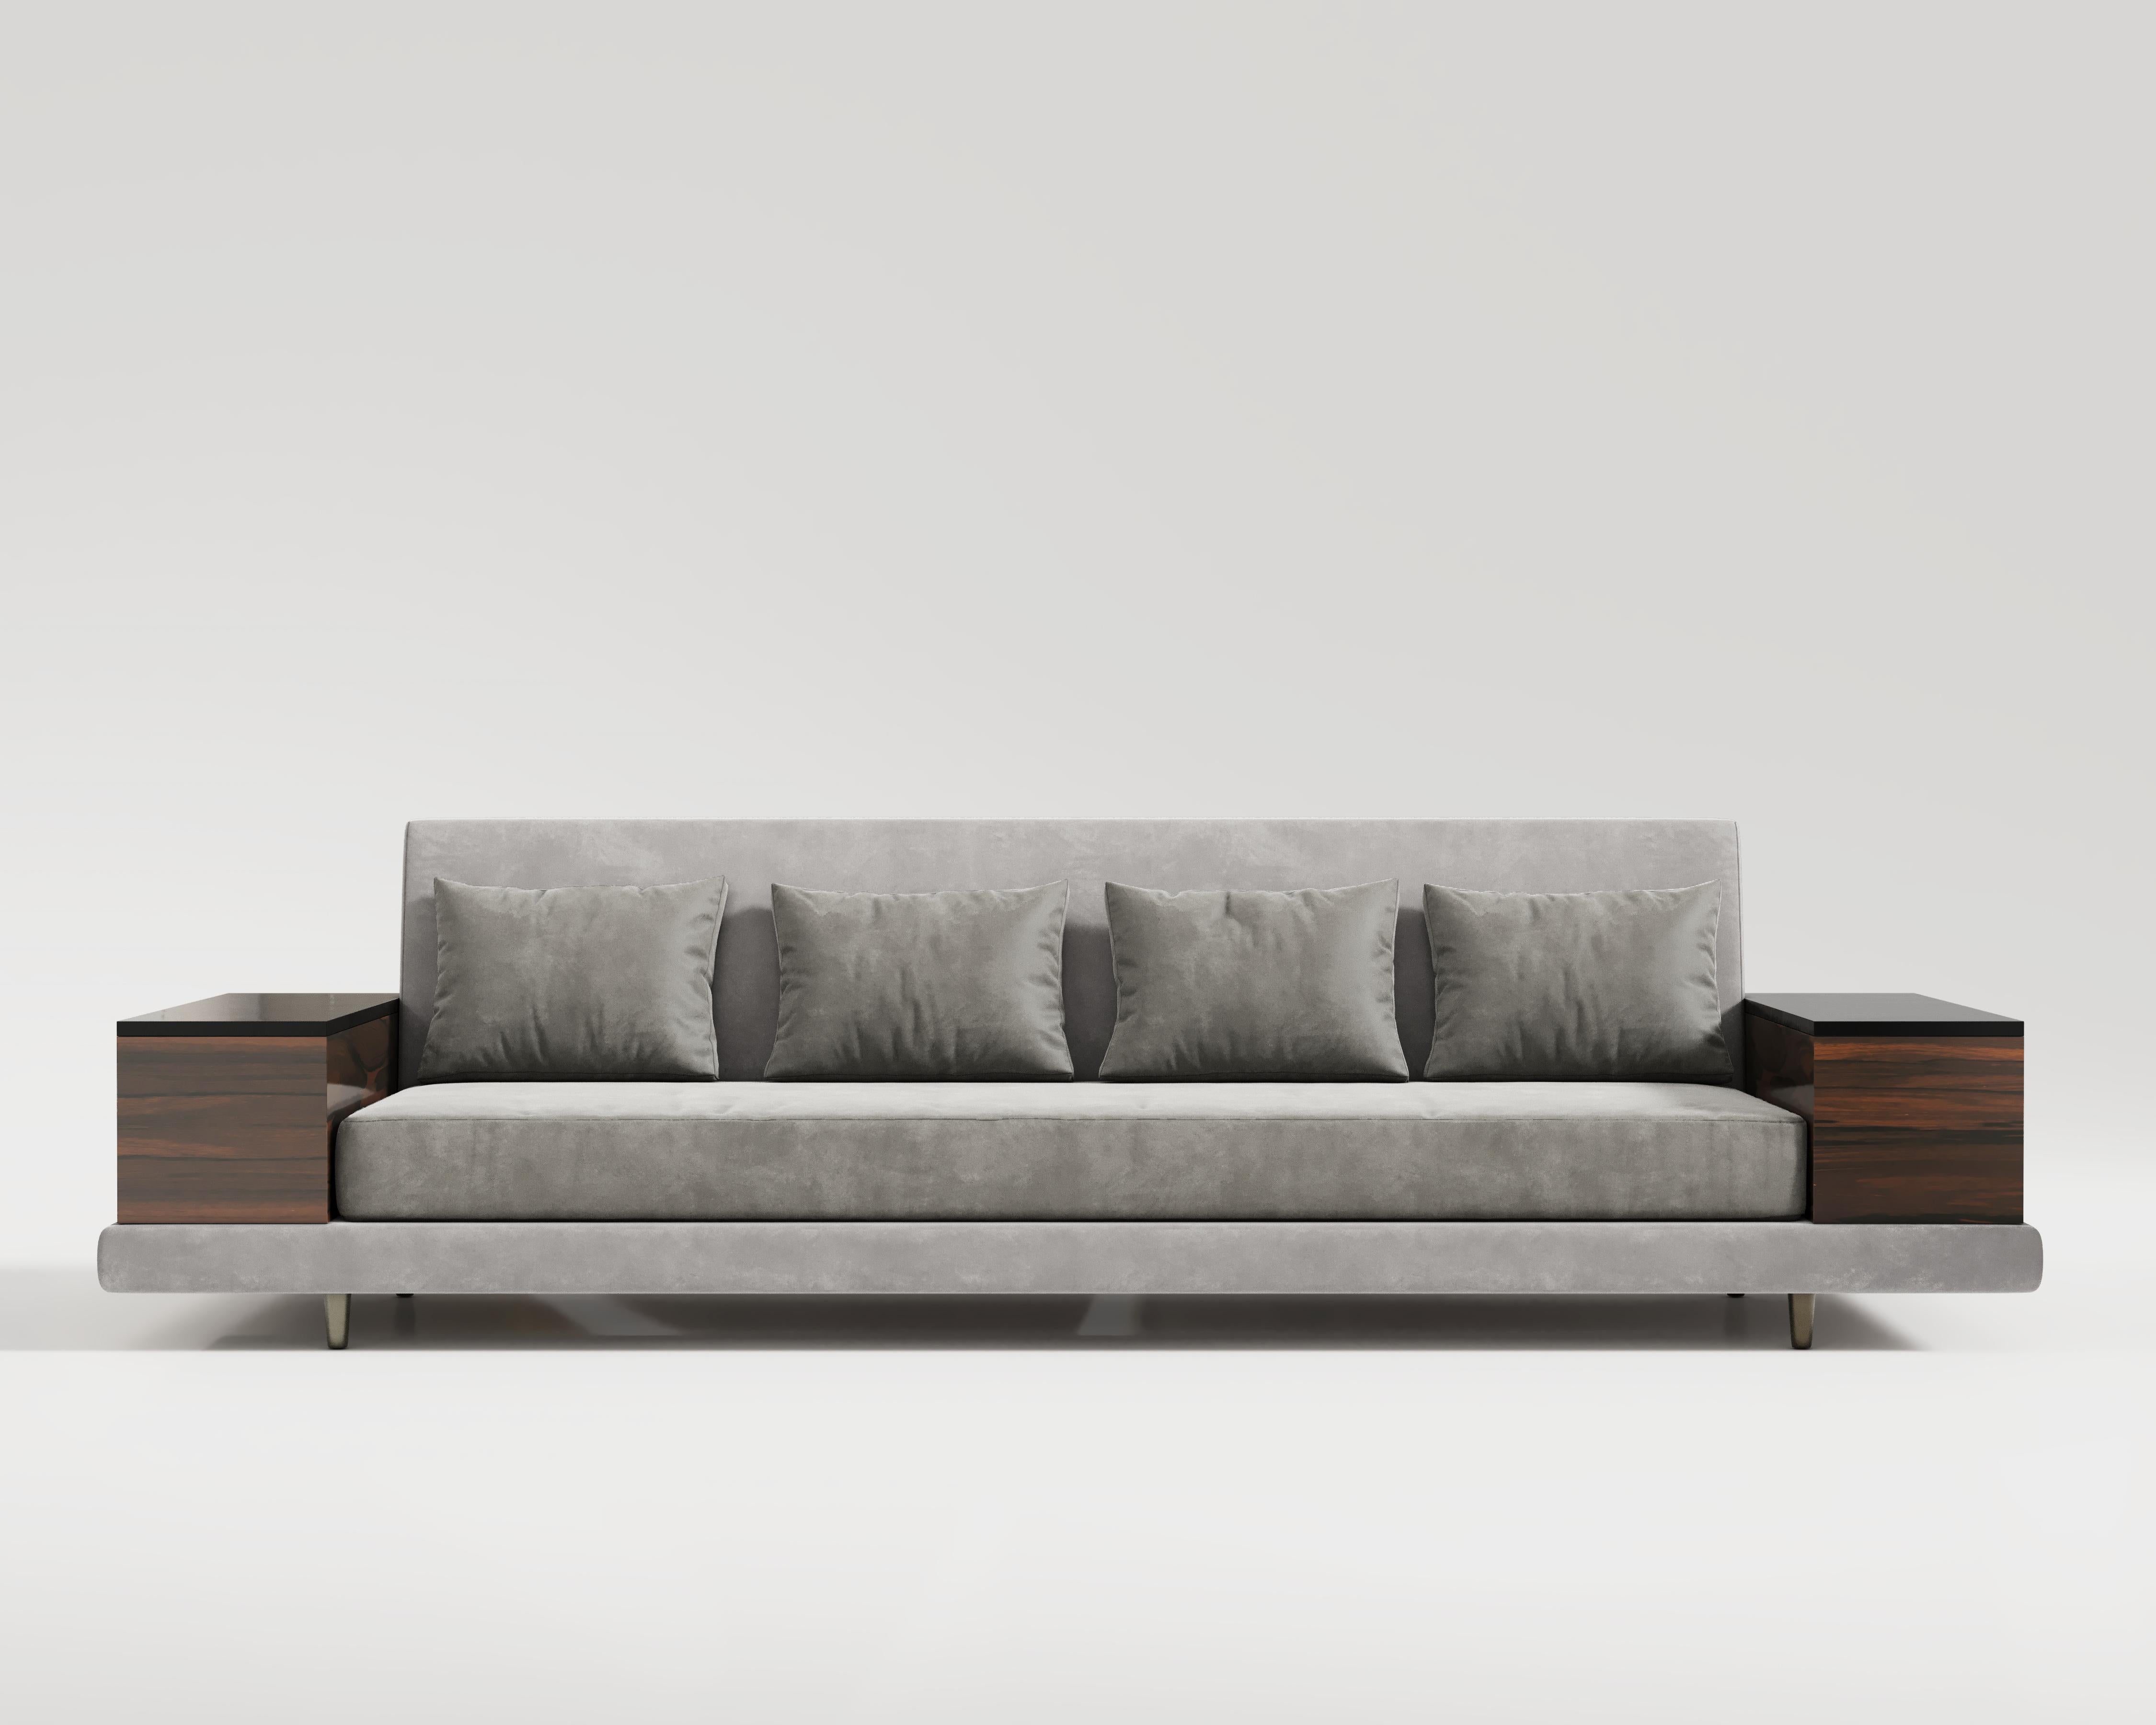 Age Sofa

Compelling in its simple yet cutting edge style, the Age sofa is a bold take on contemporary design. The sleek frame is met with grand seat cushions to create a statement making structure. Age also balances the expansive seating with side